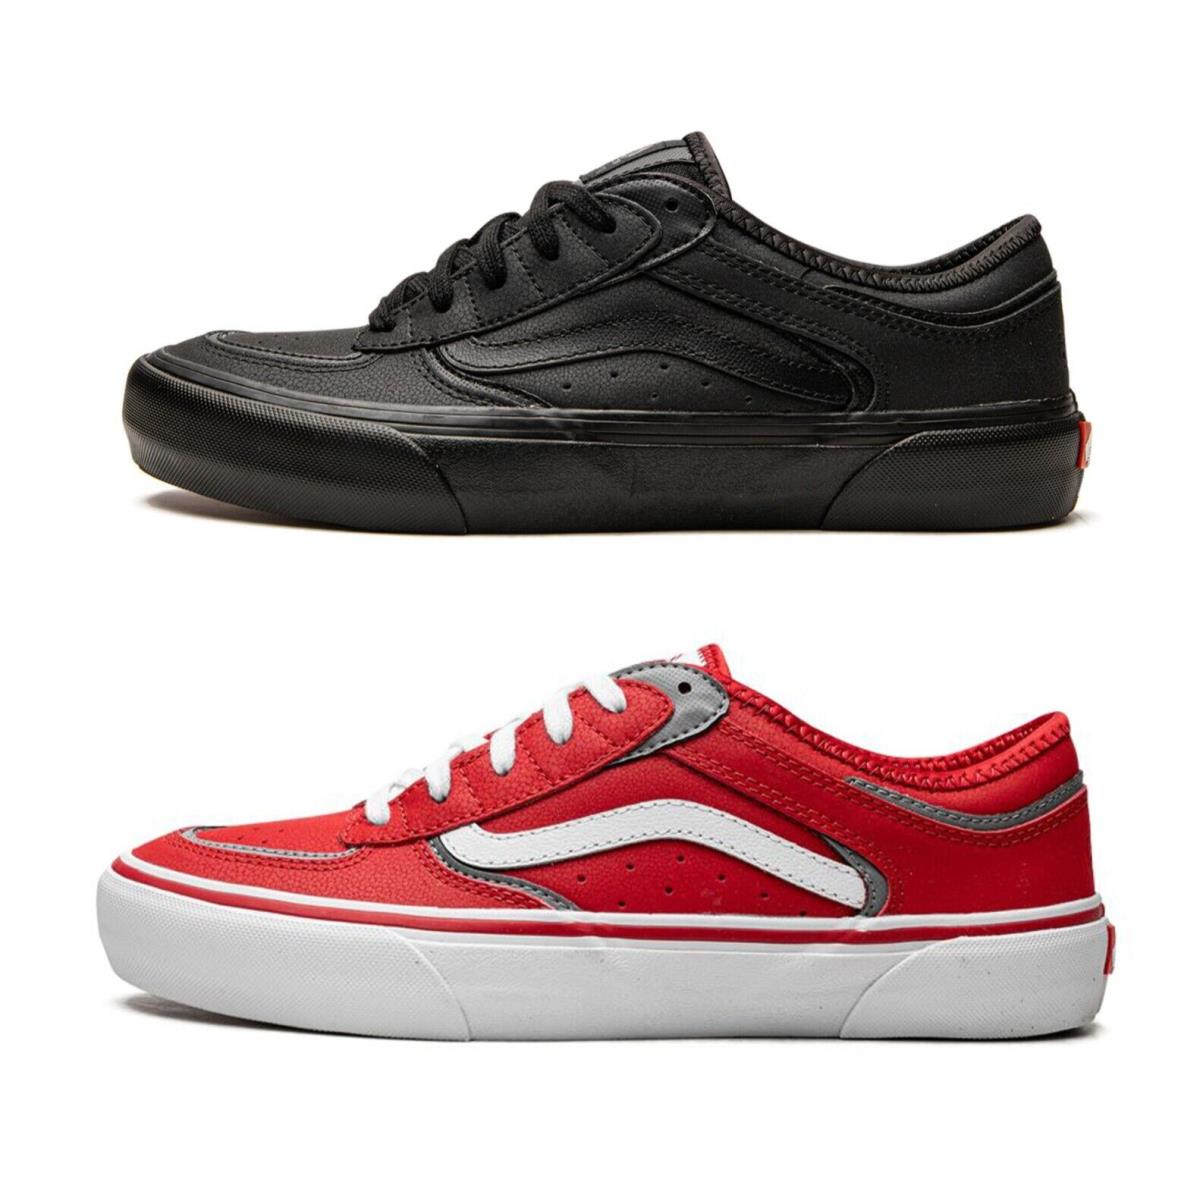 Vans Rowley Pro Black/black and Red/white Shoes - Black, Red, White